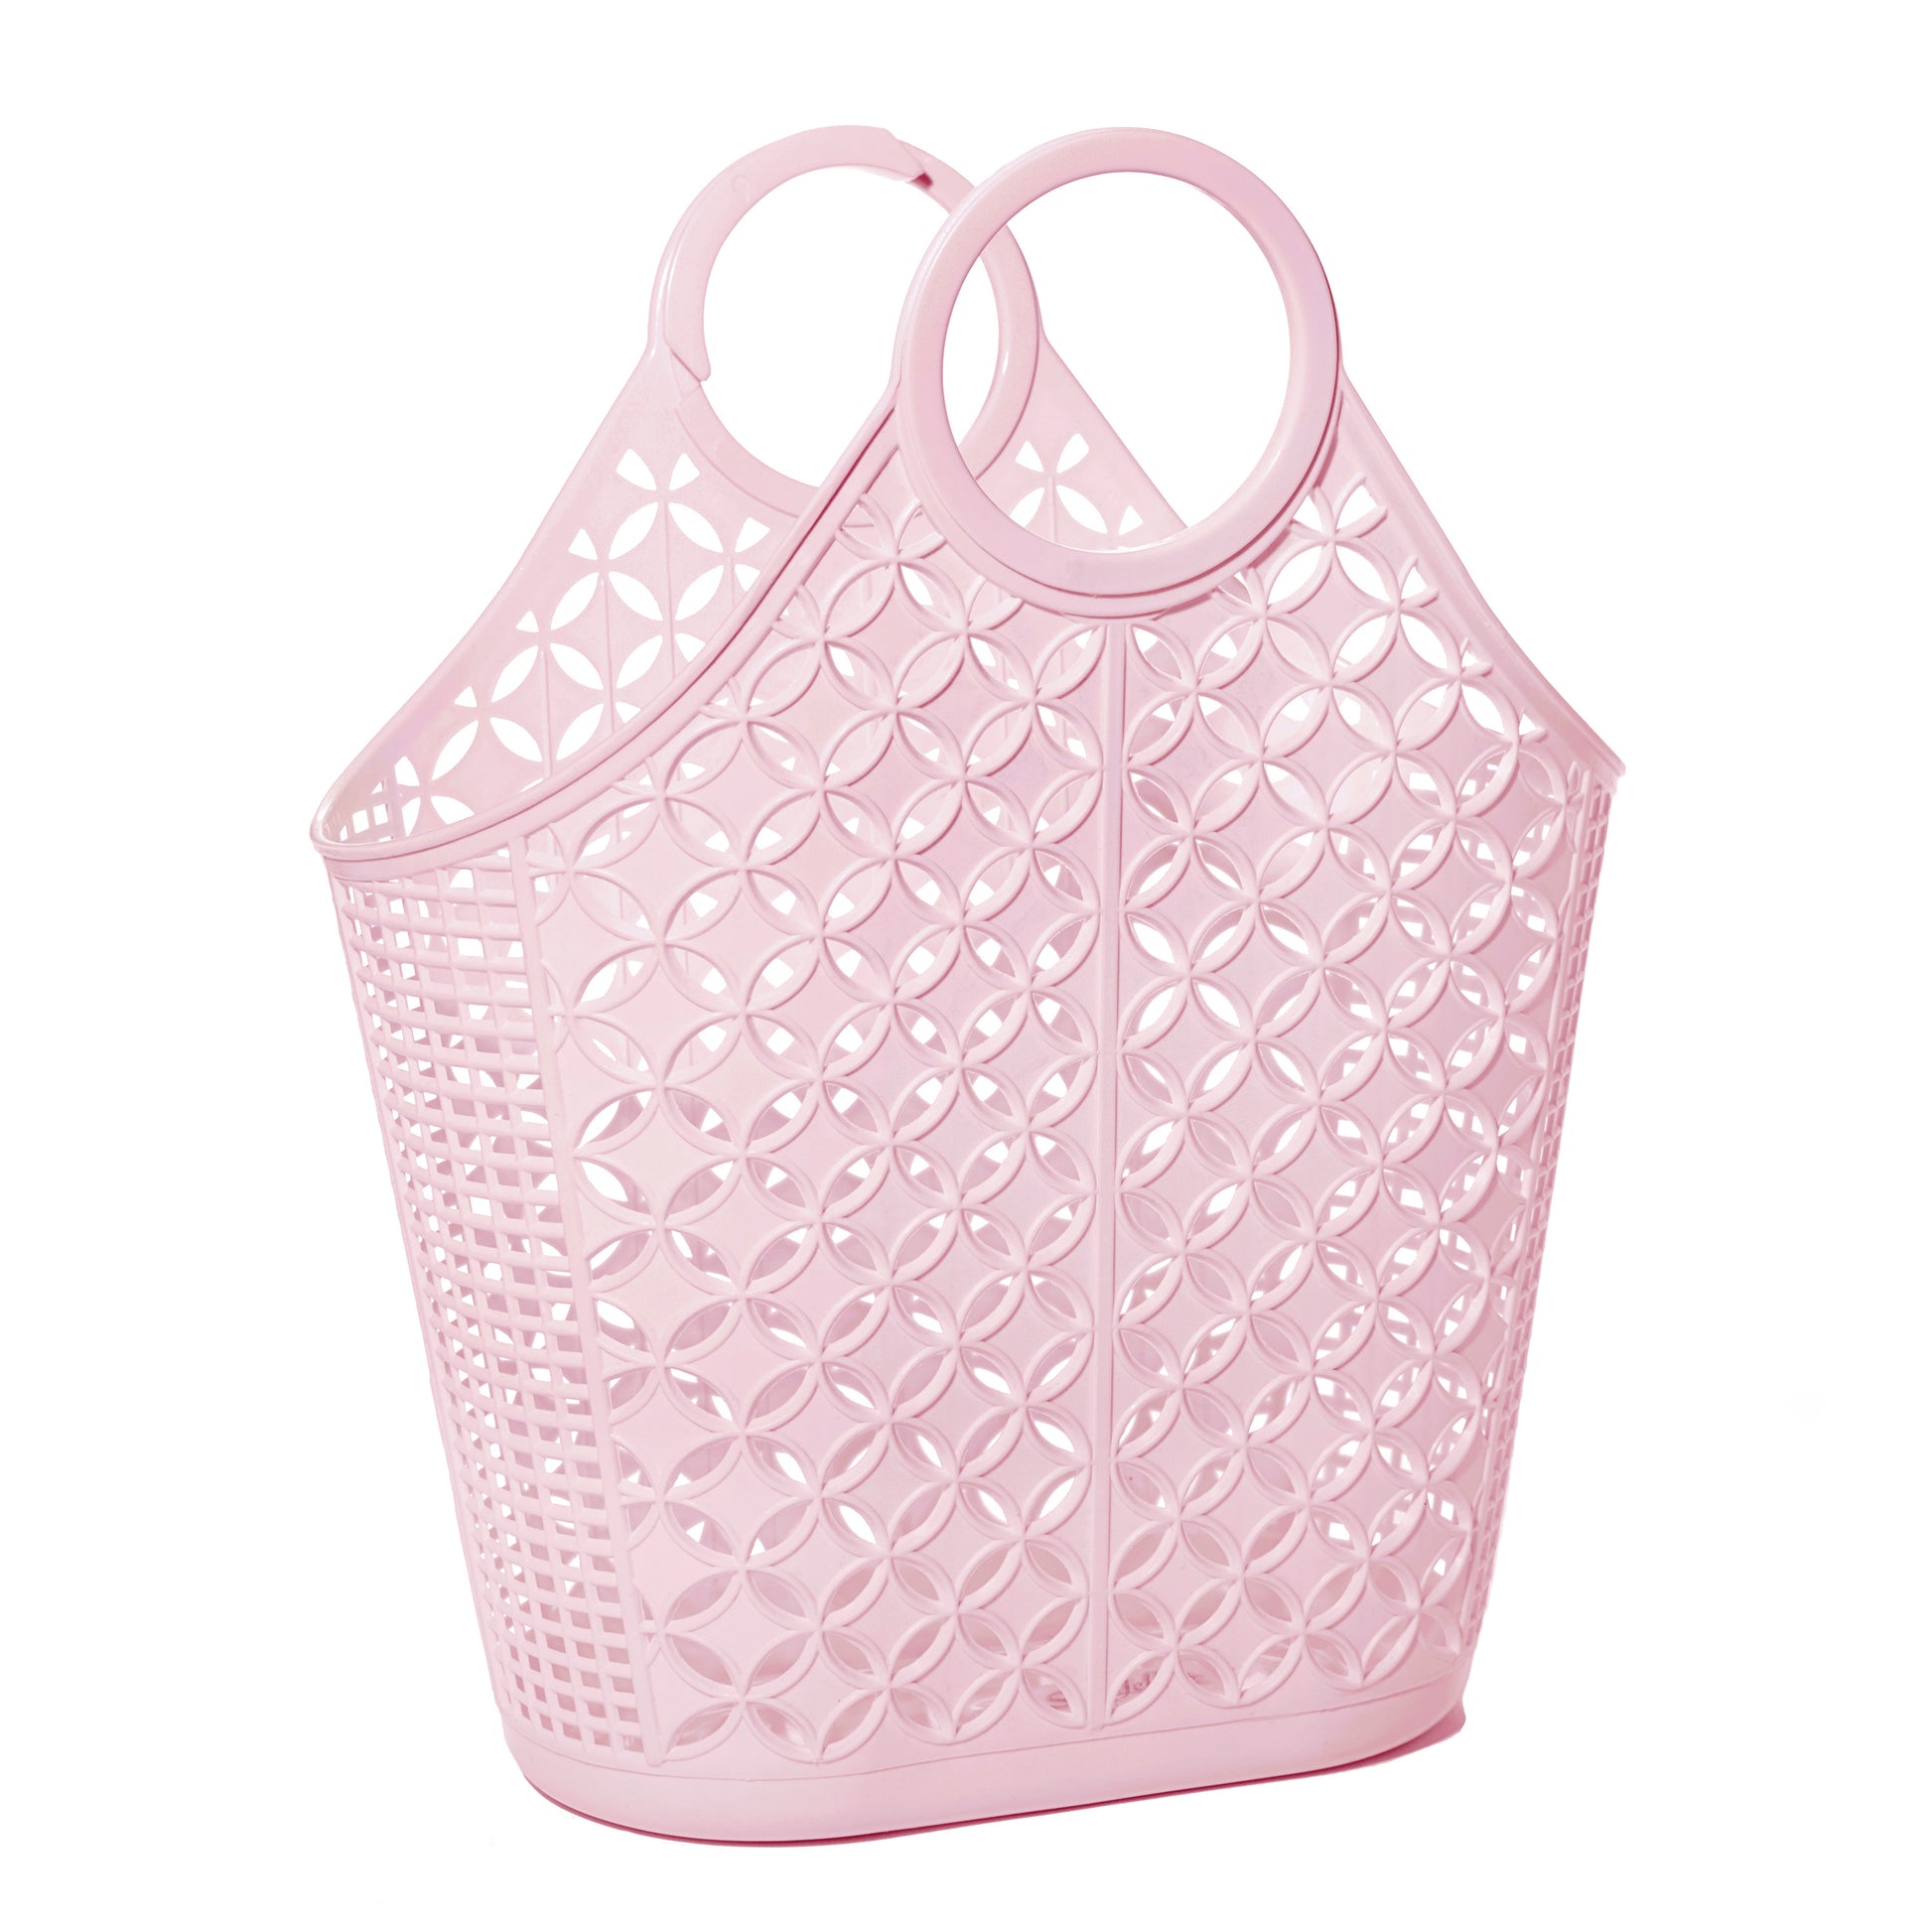 Pink Sun Jellies Atomic Tote, Vintage style market style tote perfect for the Beach or the Shops